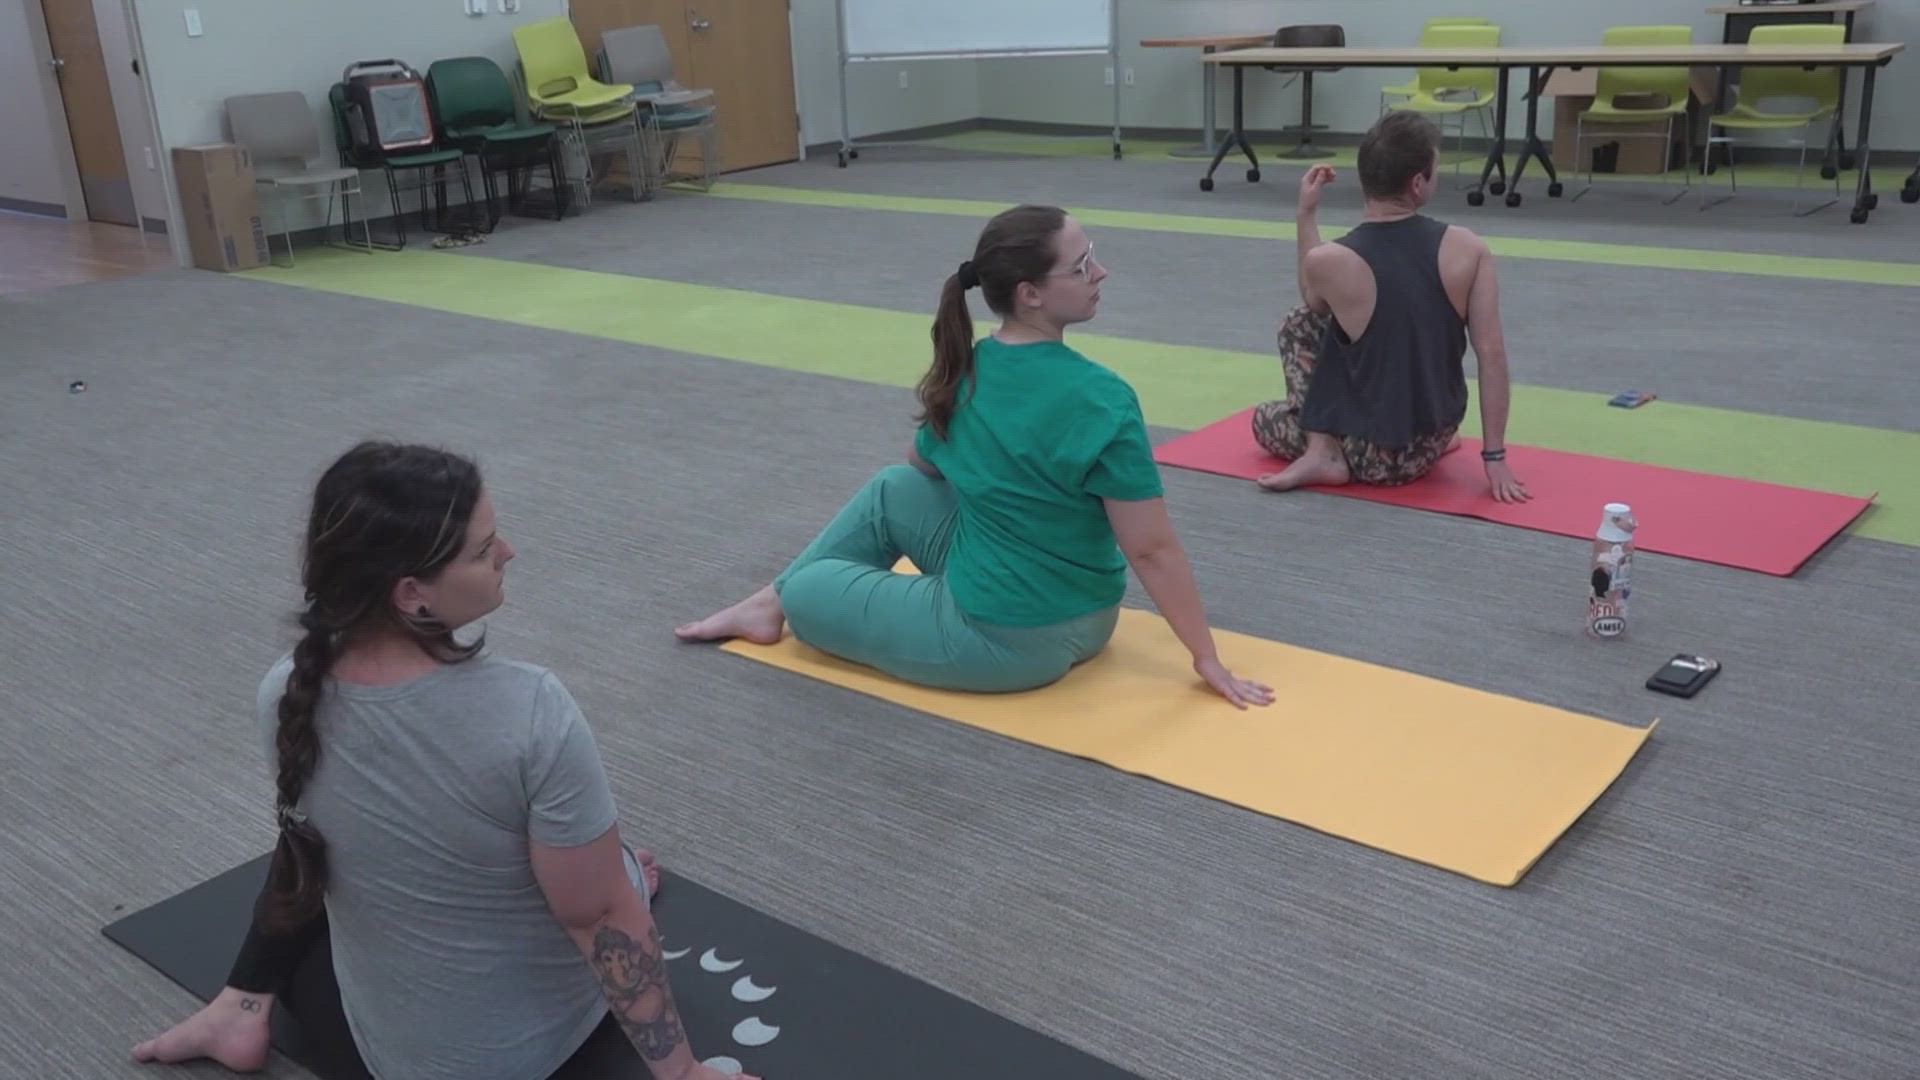 Yoga helped save me'  Man helps others in recovery through 'Sober